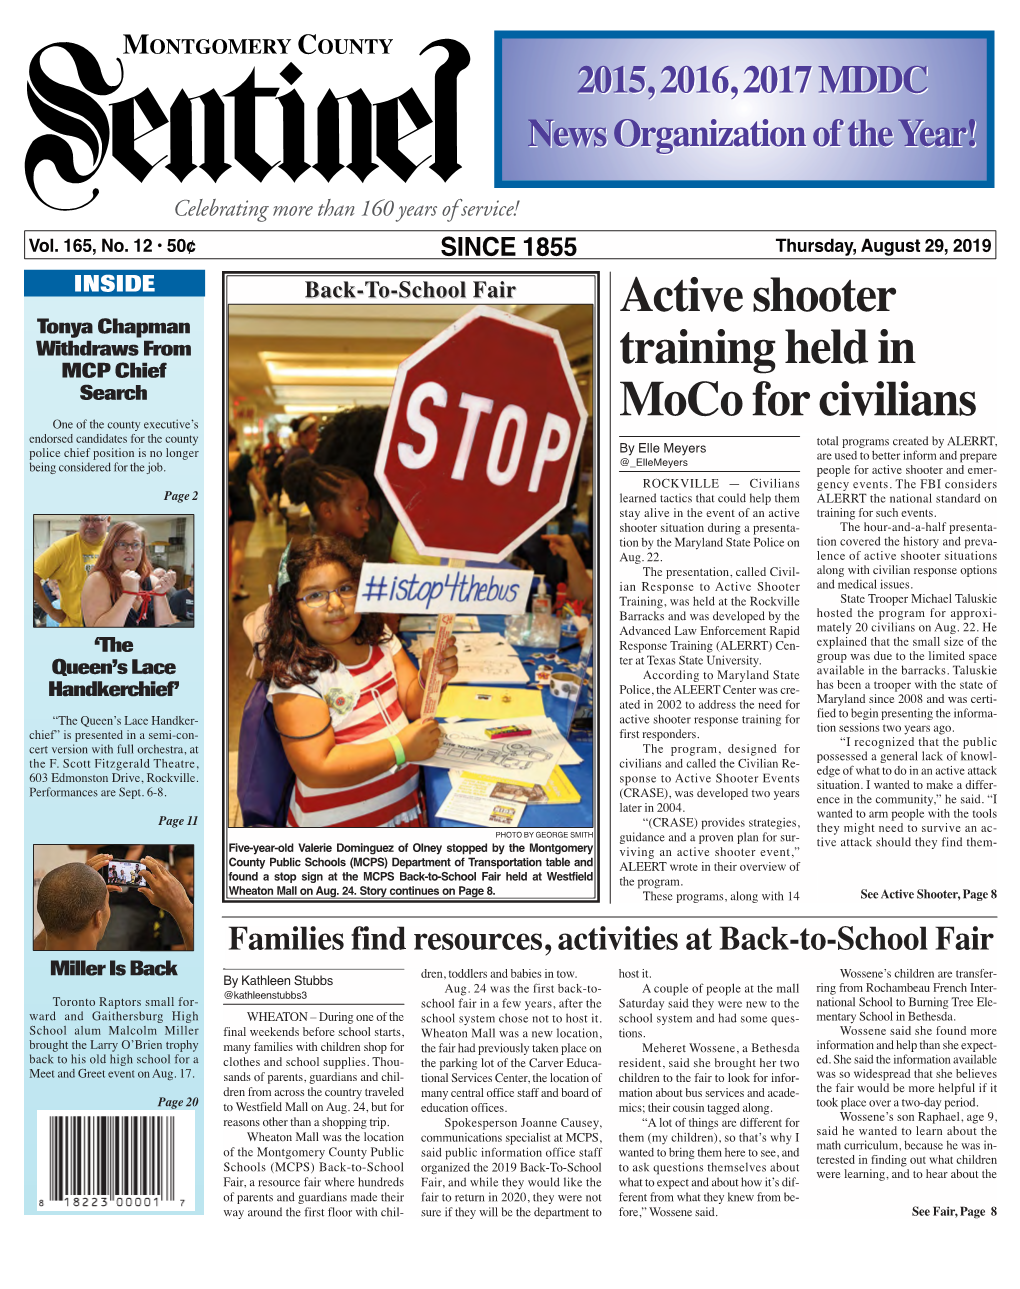 THE MONTGOMERY COUNTY SENTINEL AUGUST 29, 2019 EFLECTIONS the Montgomery County Sentinel, R Published Weekly by Berlyn Inc